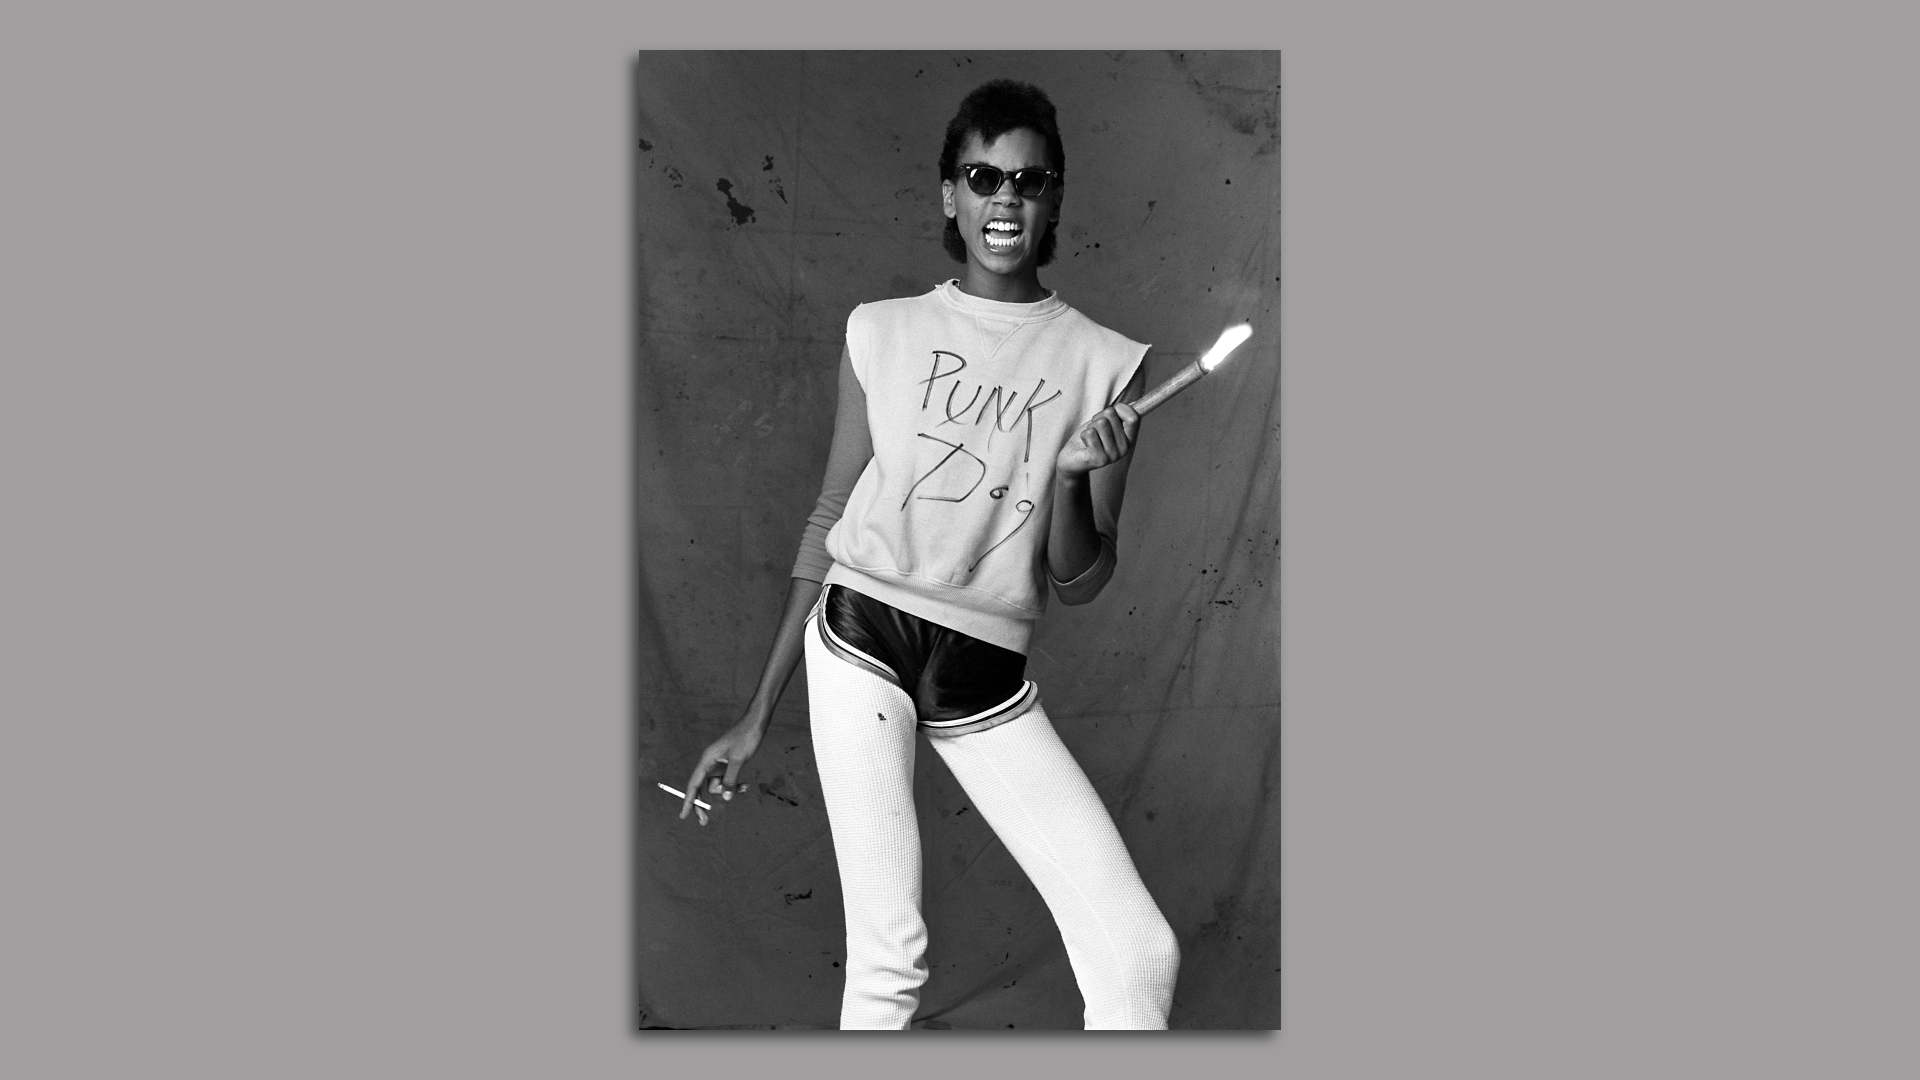 A black and white photo of a young RuPaul wearing sunglasses and a shirt saying "punk dog" while holding a flare and cigarette